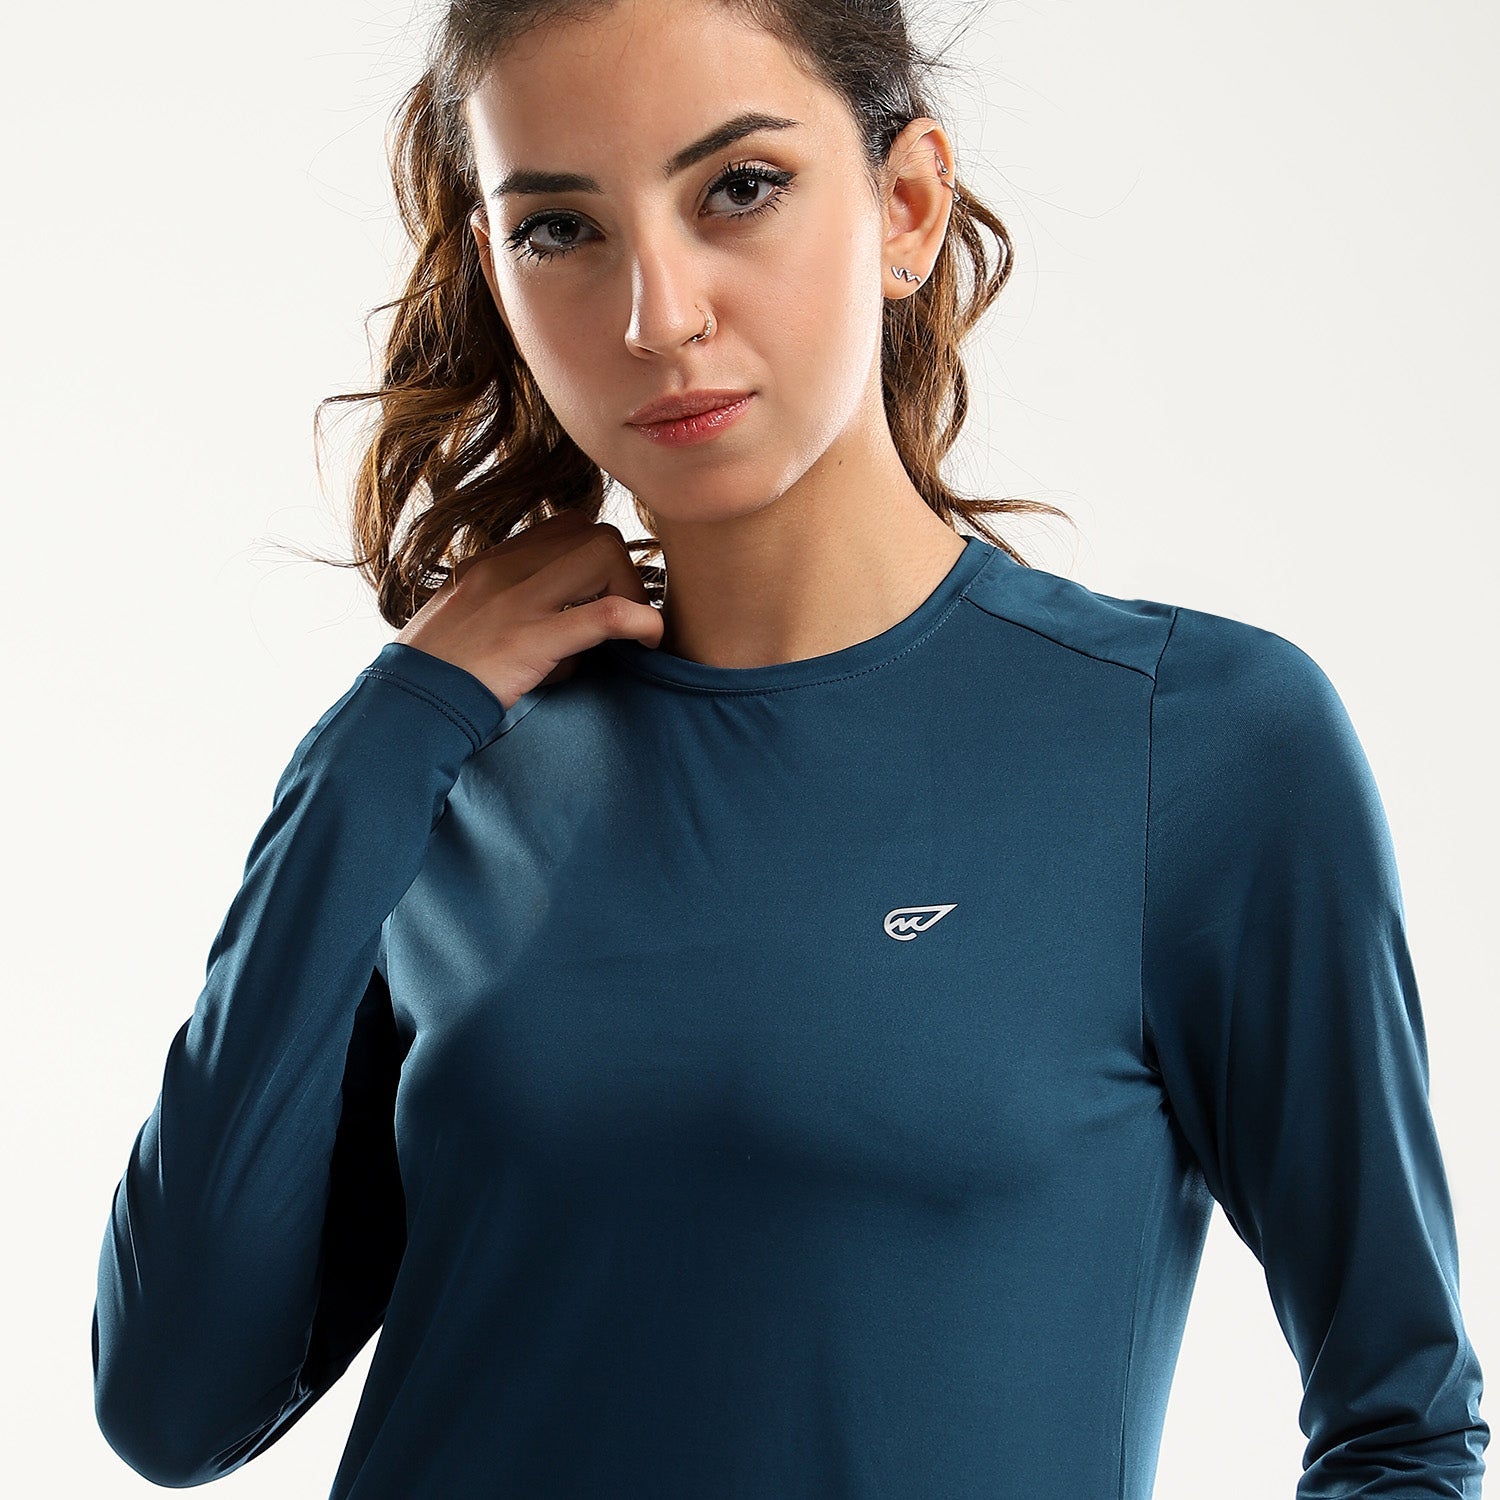 Basic Long Sleeve Top in Teal - Sporty Pro